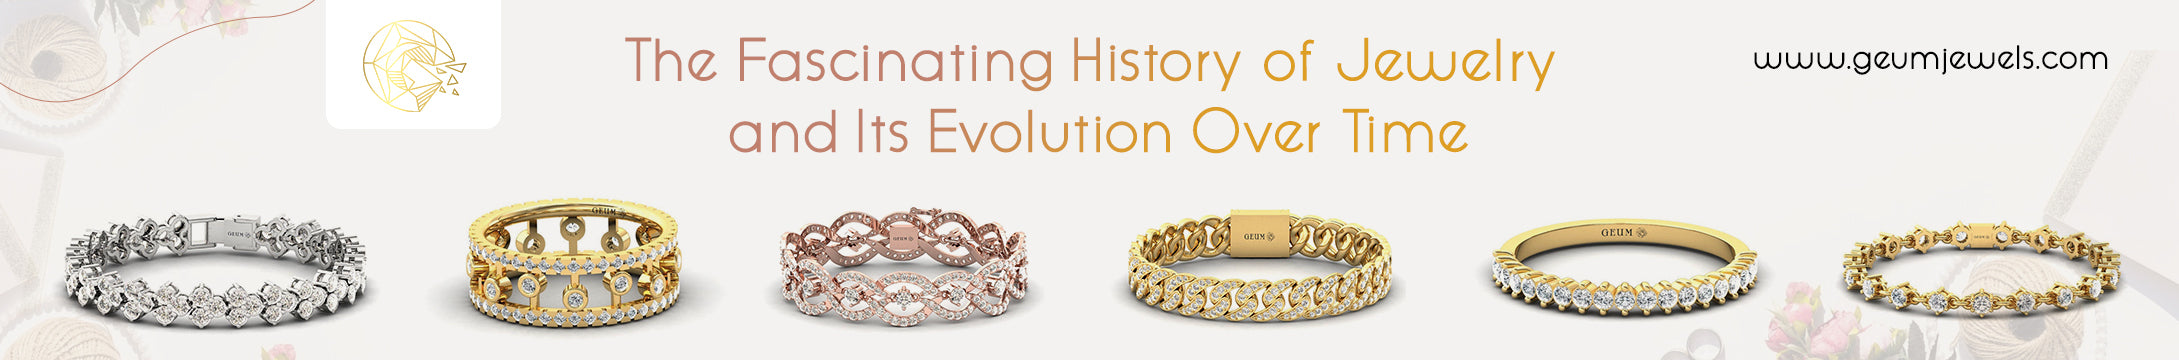 The Fascinating History of Jewelry and Its Evolution Over Time